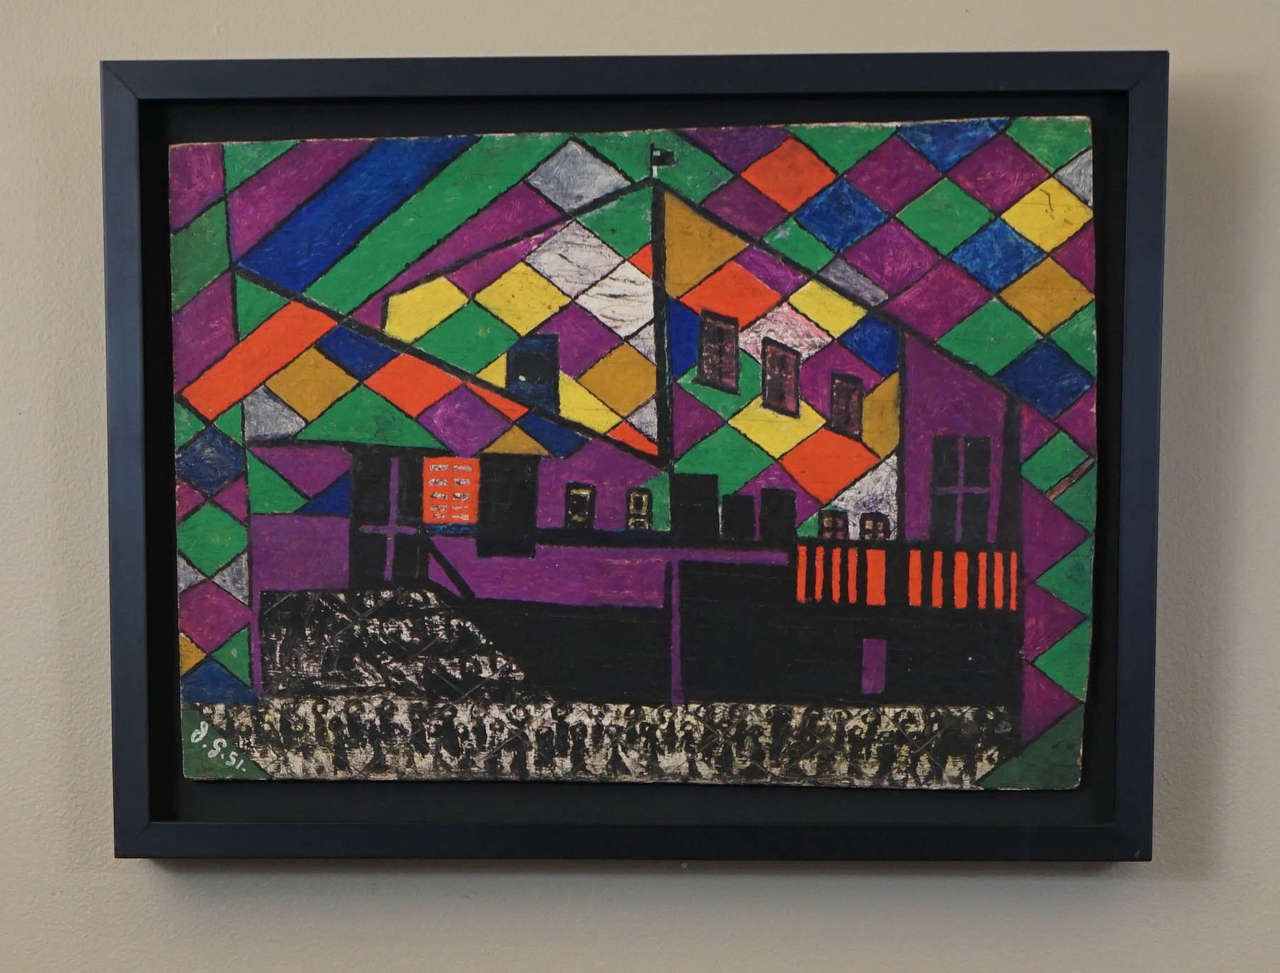 Faceted City, Second great Joseph Garlock, from the Garlock estate, this amazing newly discovered colorful paint on board from 1951, by the iconic artist.